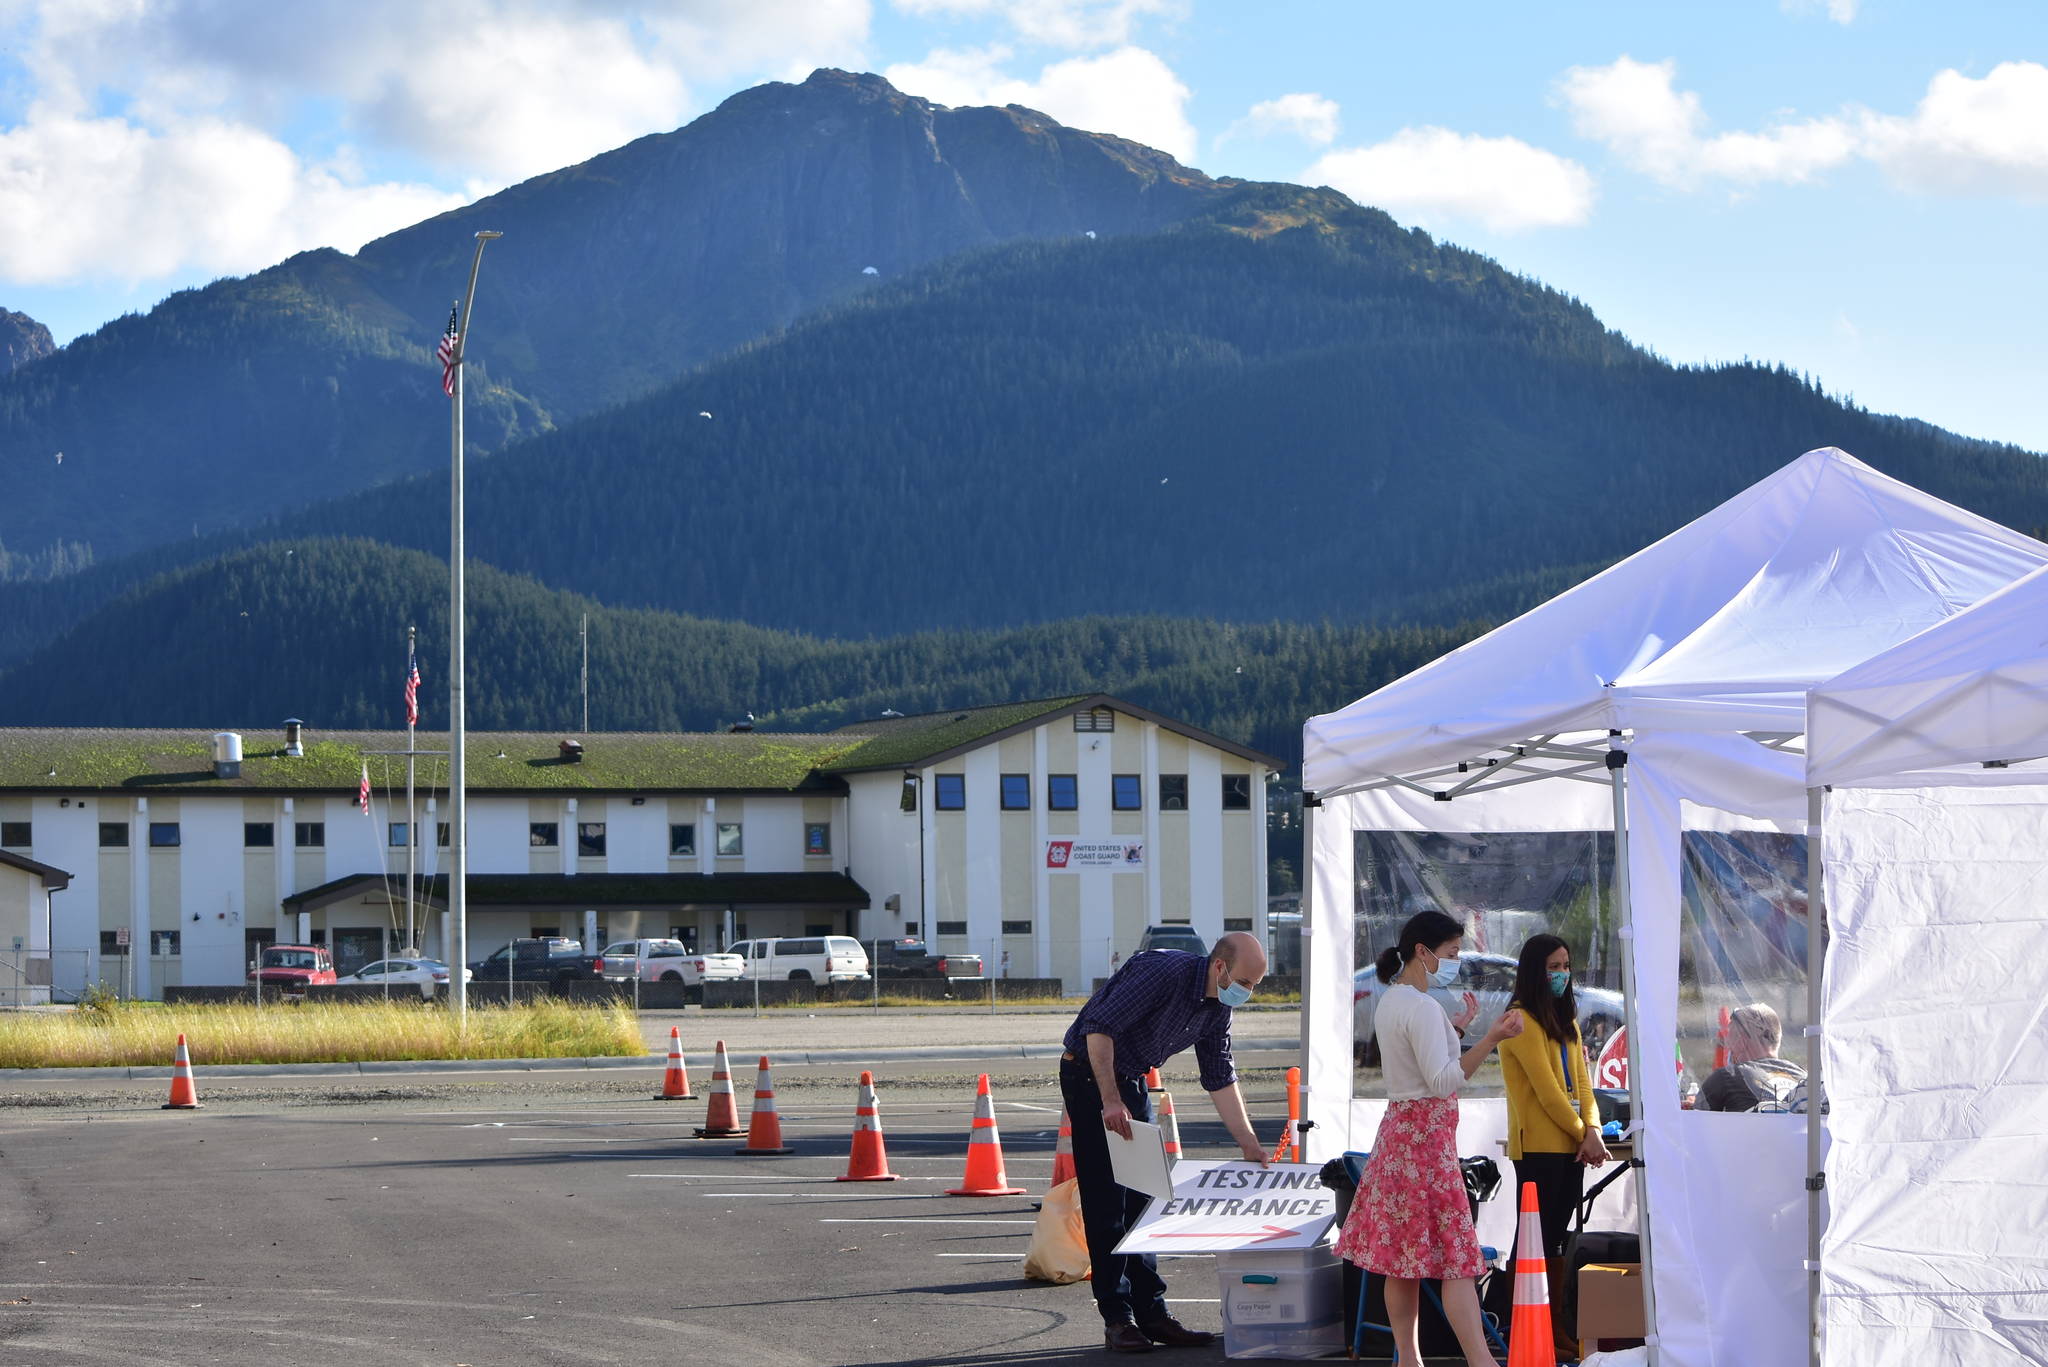 Peter Segall / Juneau Empire                                 The City and Borough of Juneau set up additional testing centers in the parking lot of Centennial Hall on Thursday in downtown Juneau. Additional sites were needed to meet high demand for testing following a advisory earlier in the week. City officials said they would consider setting up the testing site again if the need arises.